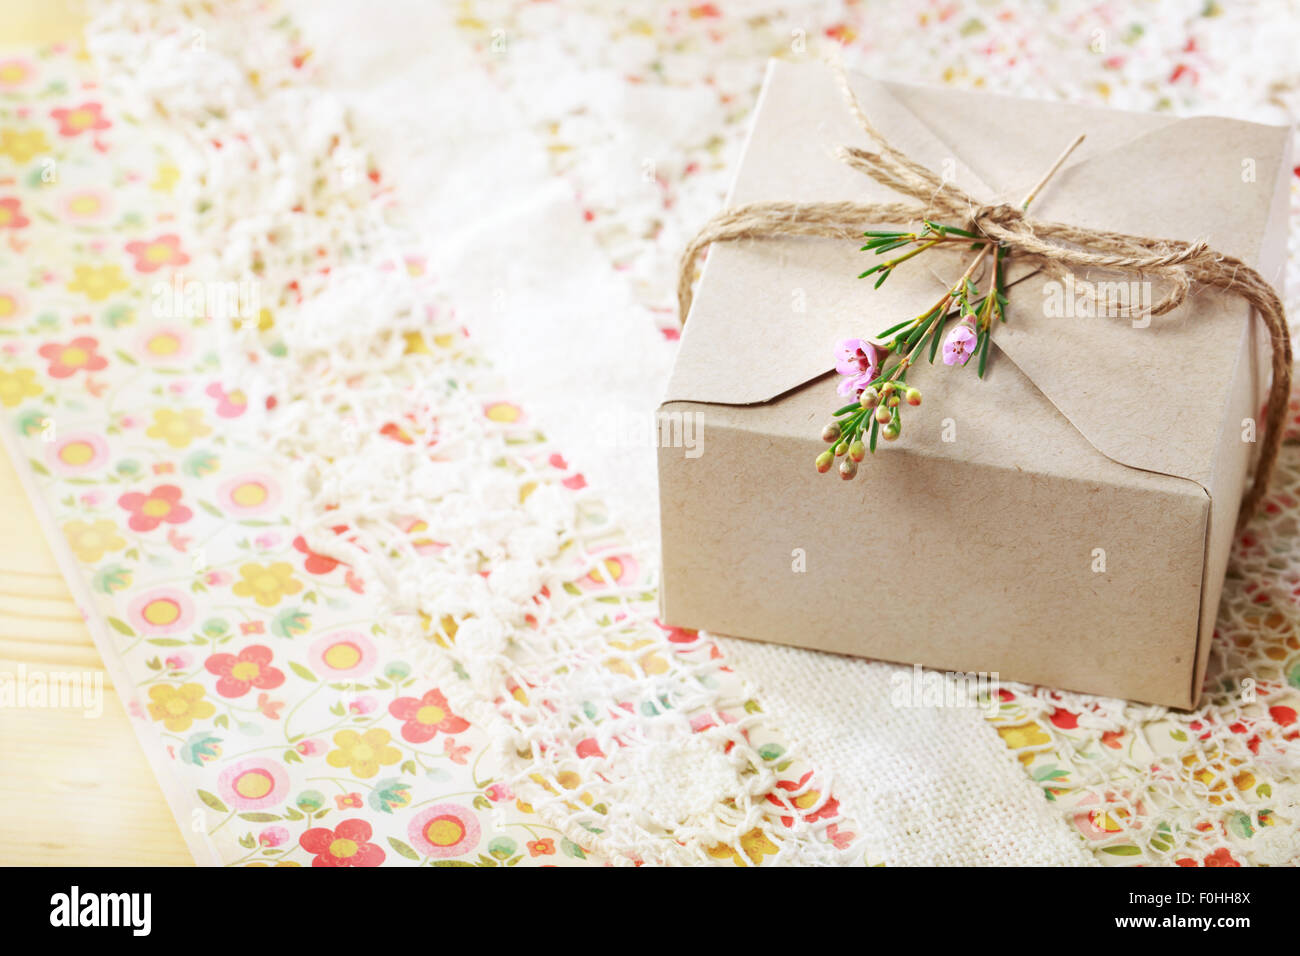 Hand crafted card stock present box with wax flowers Stock Photo